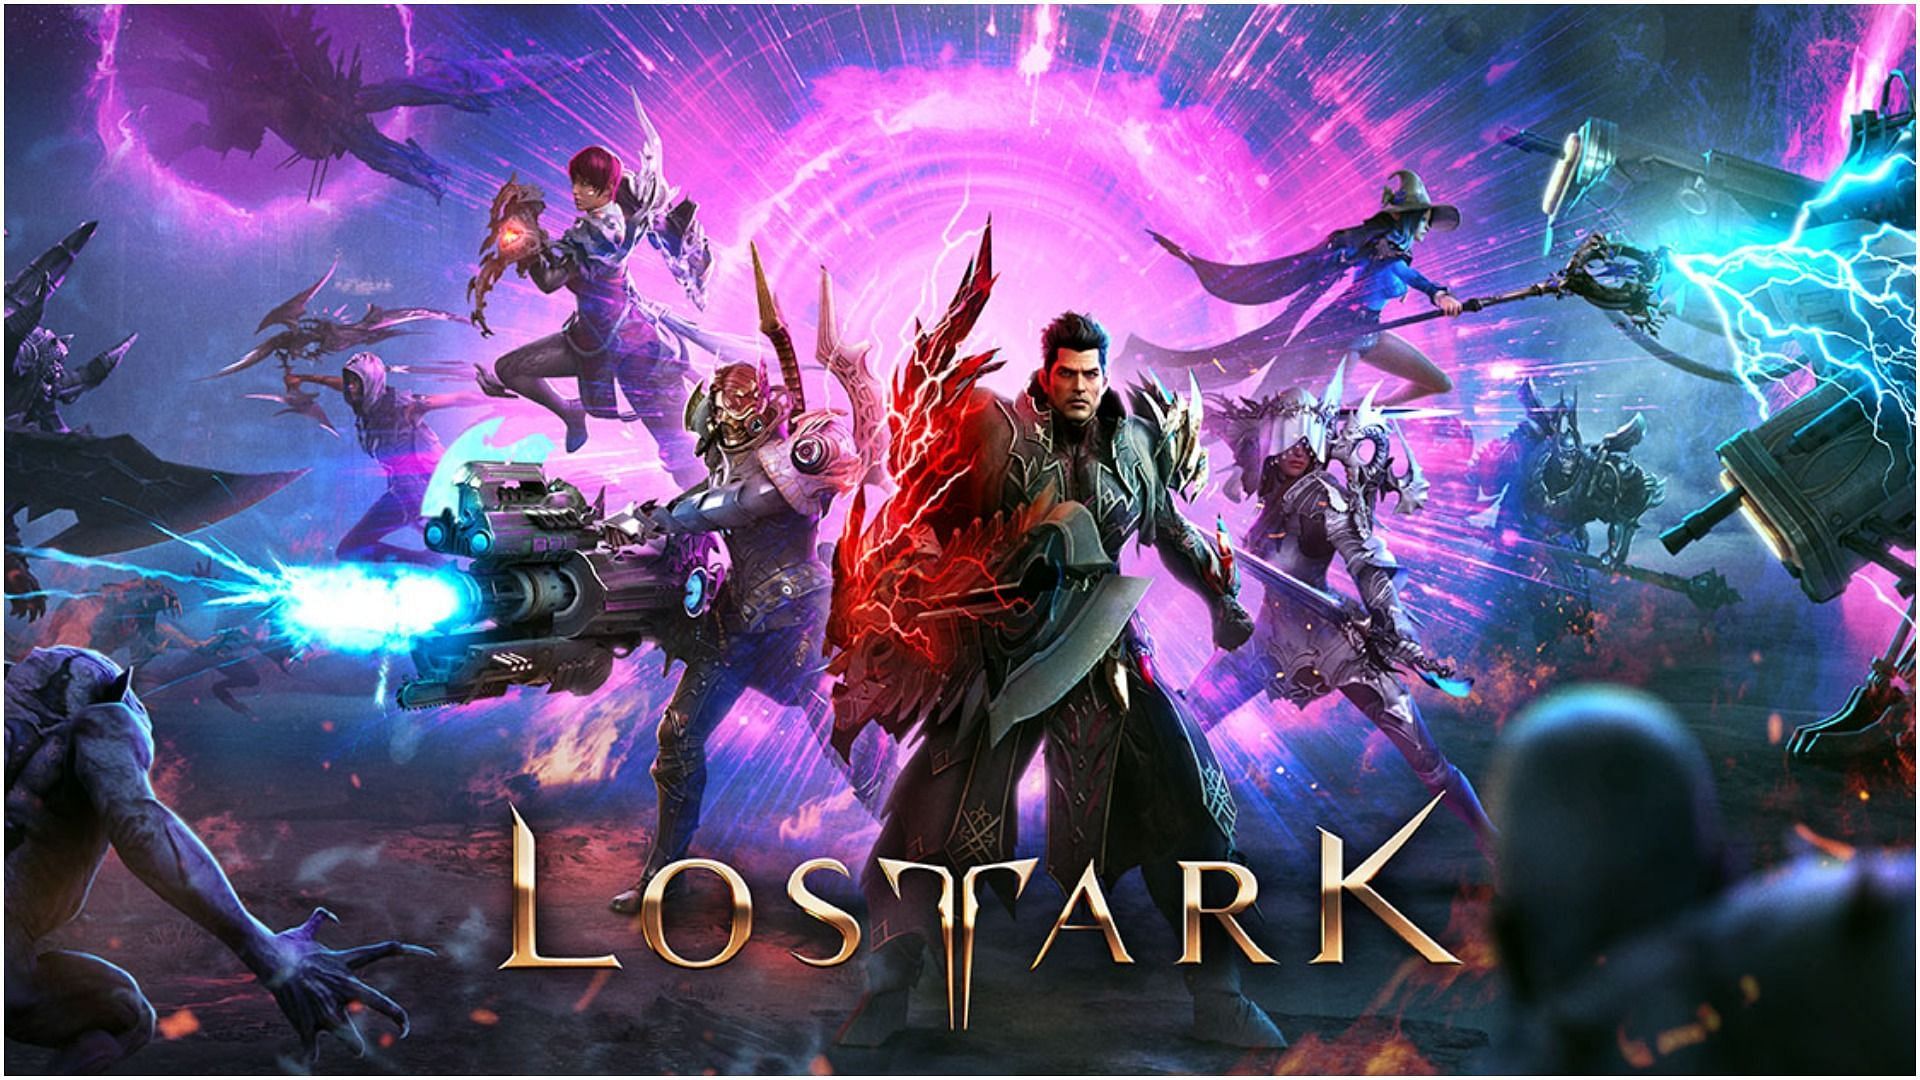 Lost Ark Adds Servers, Offers Extra Loot to Ease Congestion - Gameranx